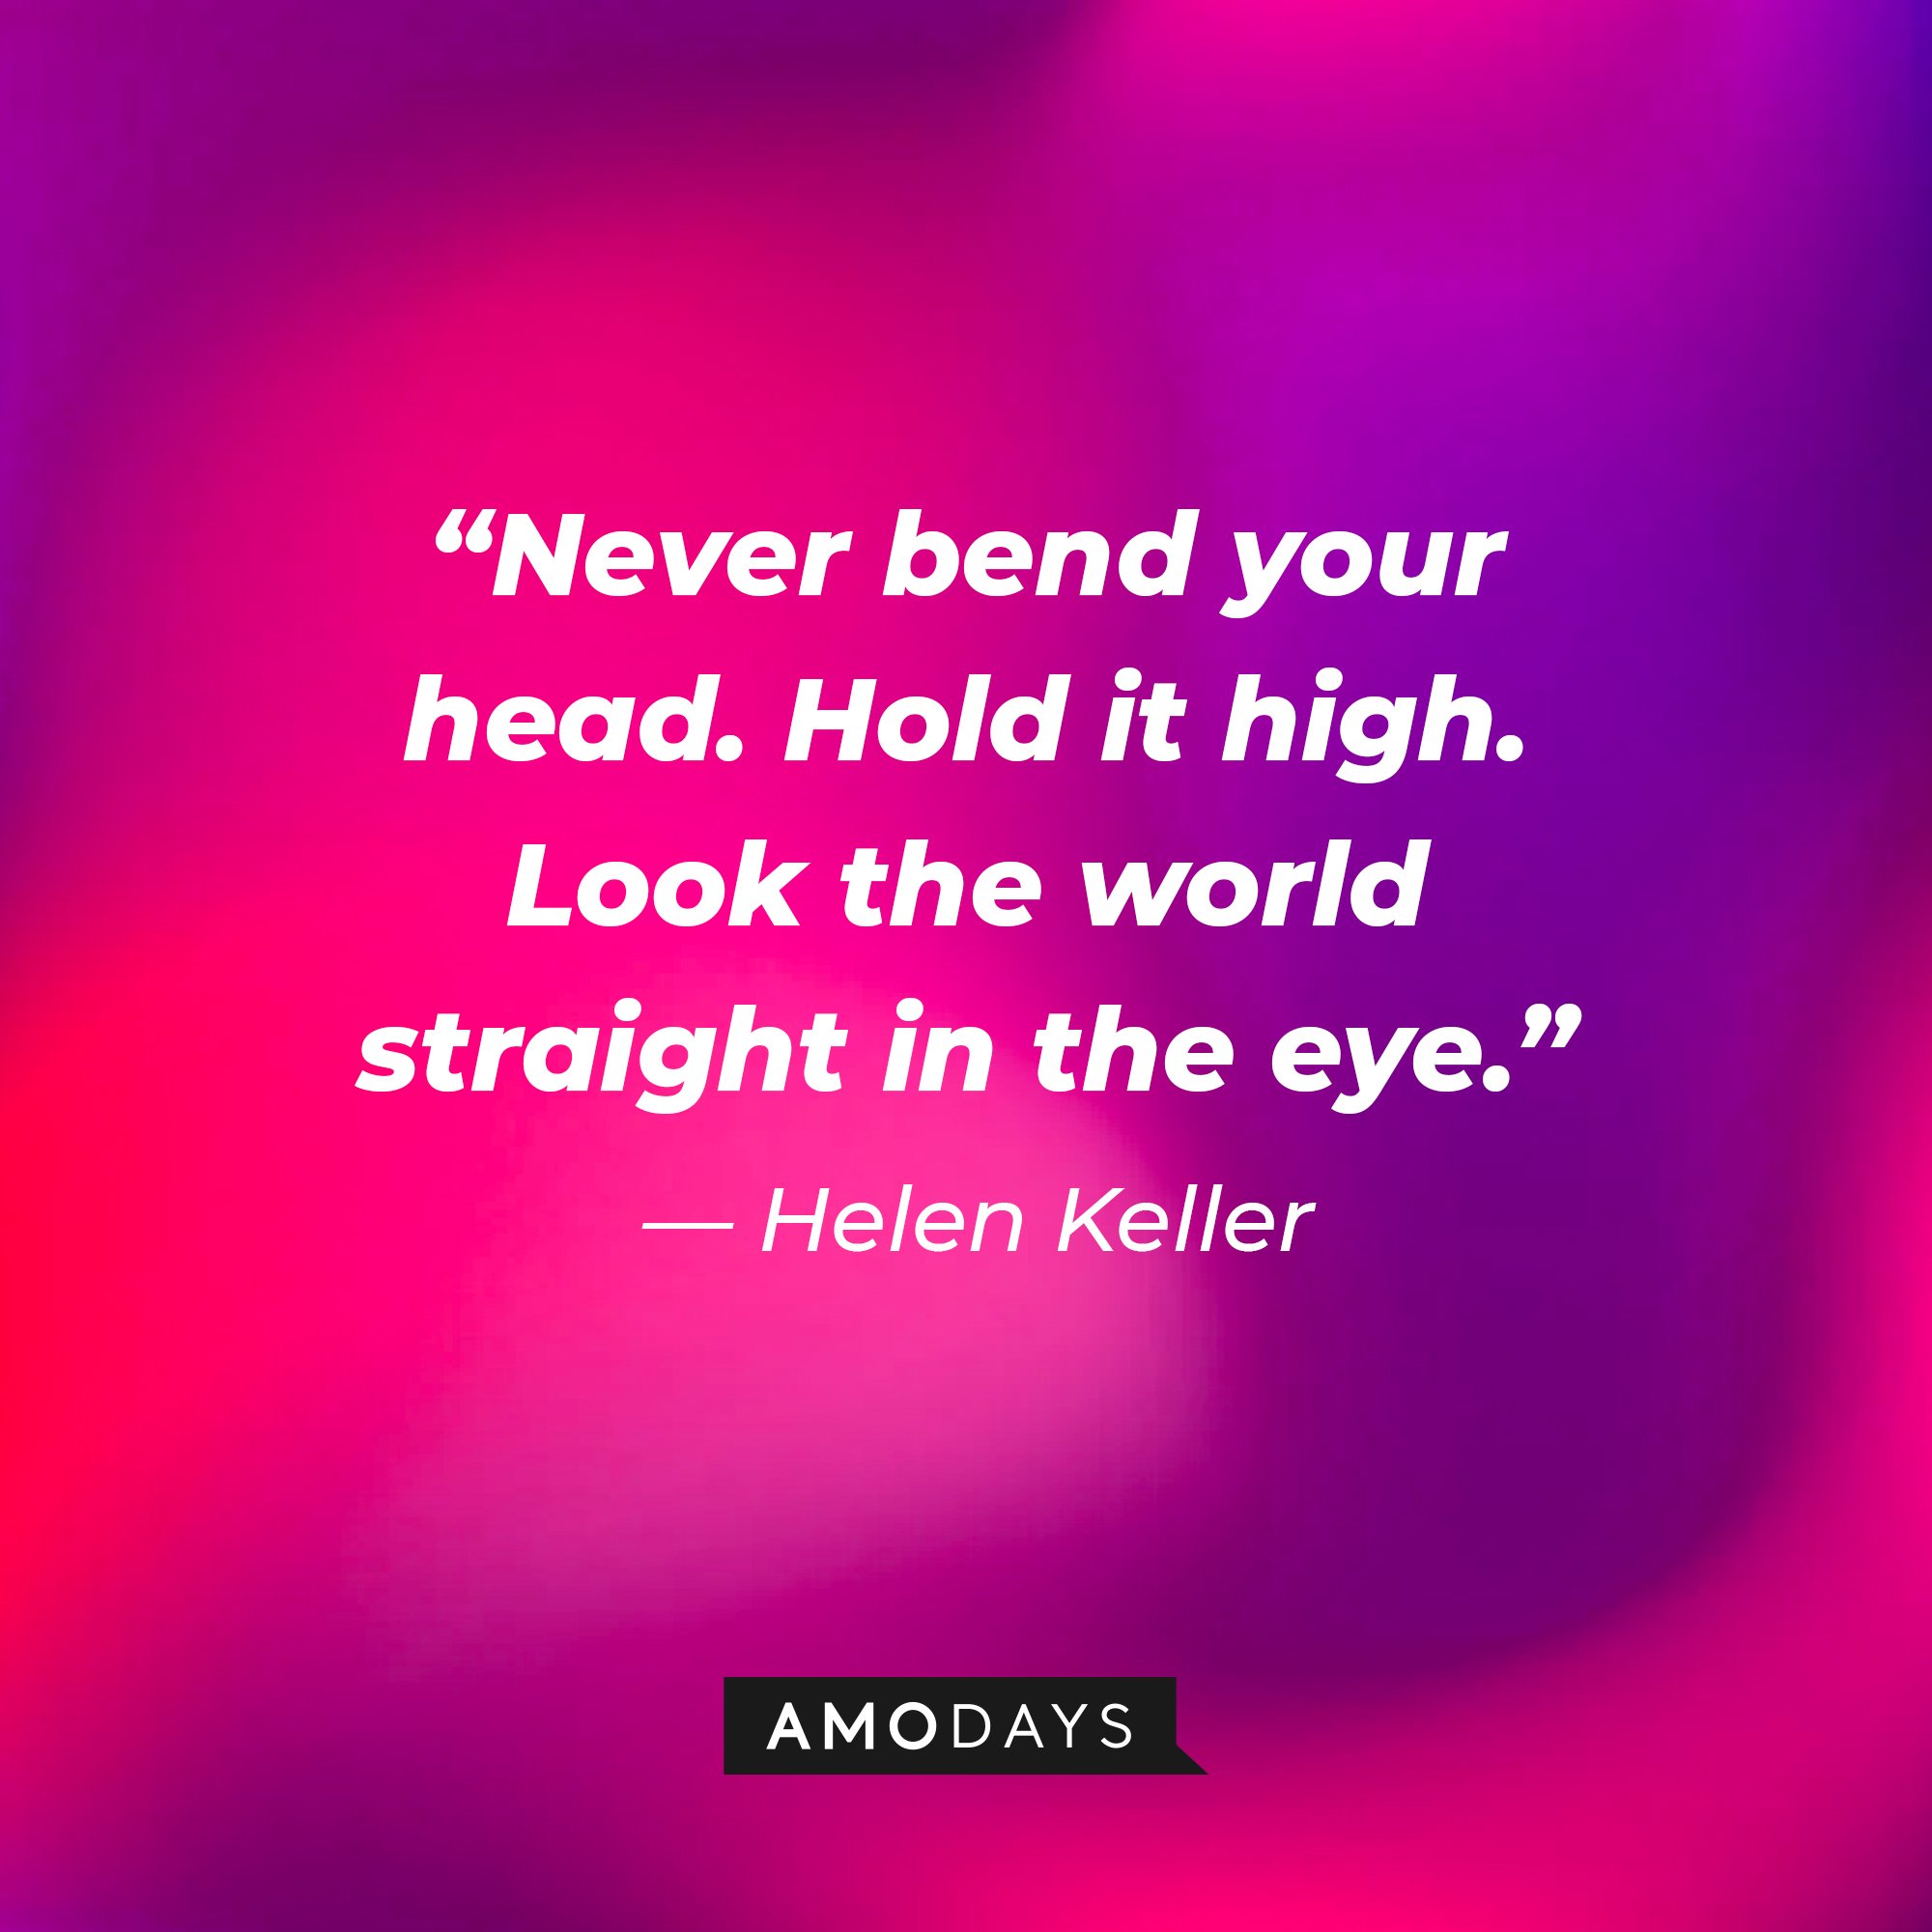 Helen Keller’s quote: “Never bend your head. Hold it high. Look the world straight in the eye.” | Image: AmoDays